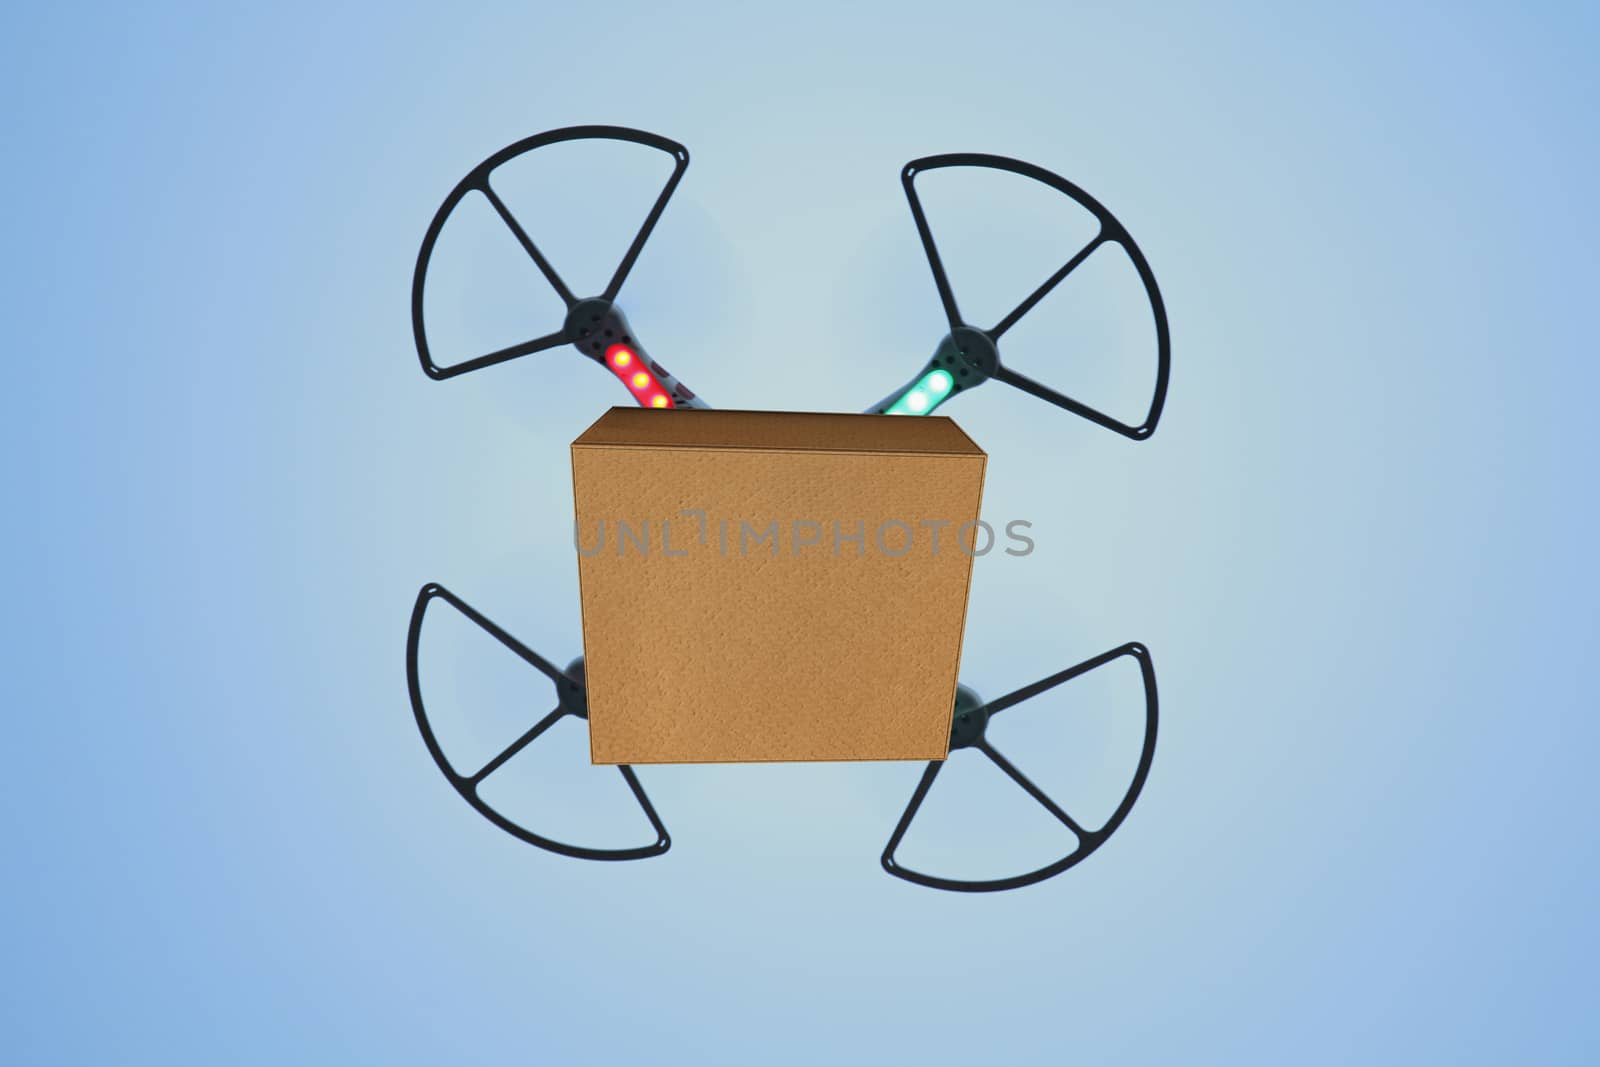 Air drone carrying carton box for fast delivery concept by yands